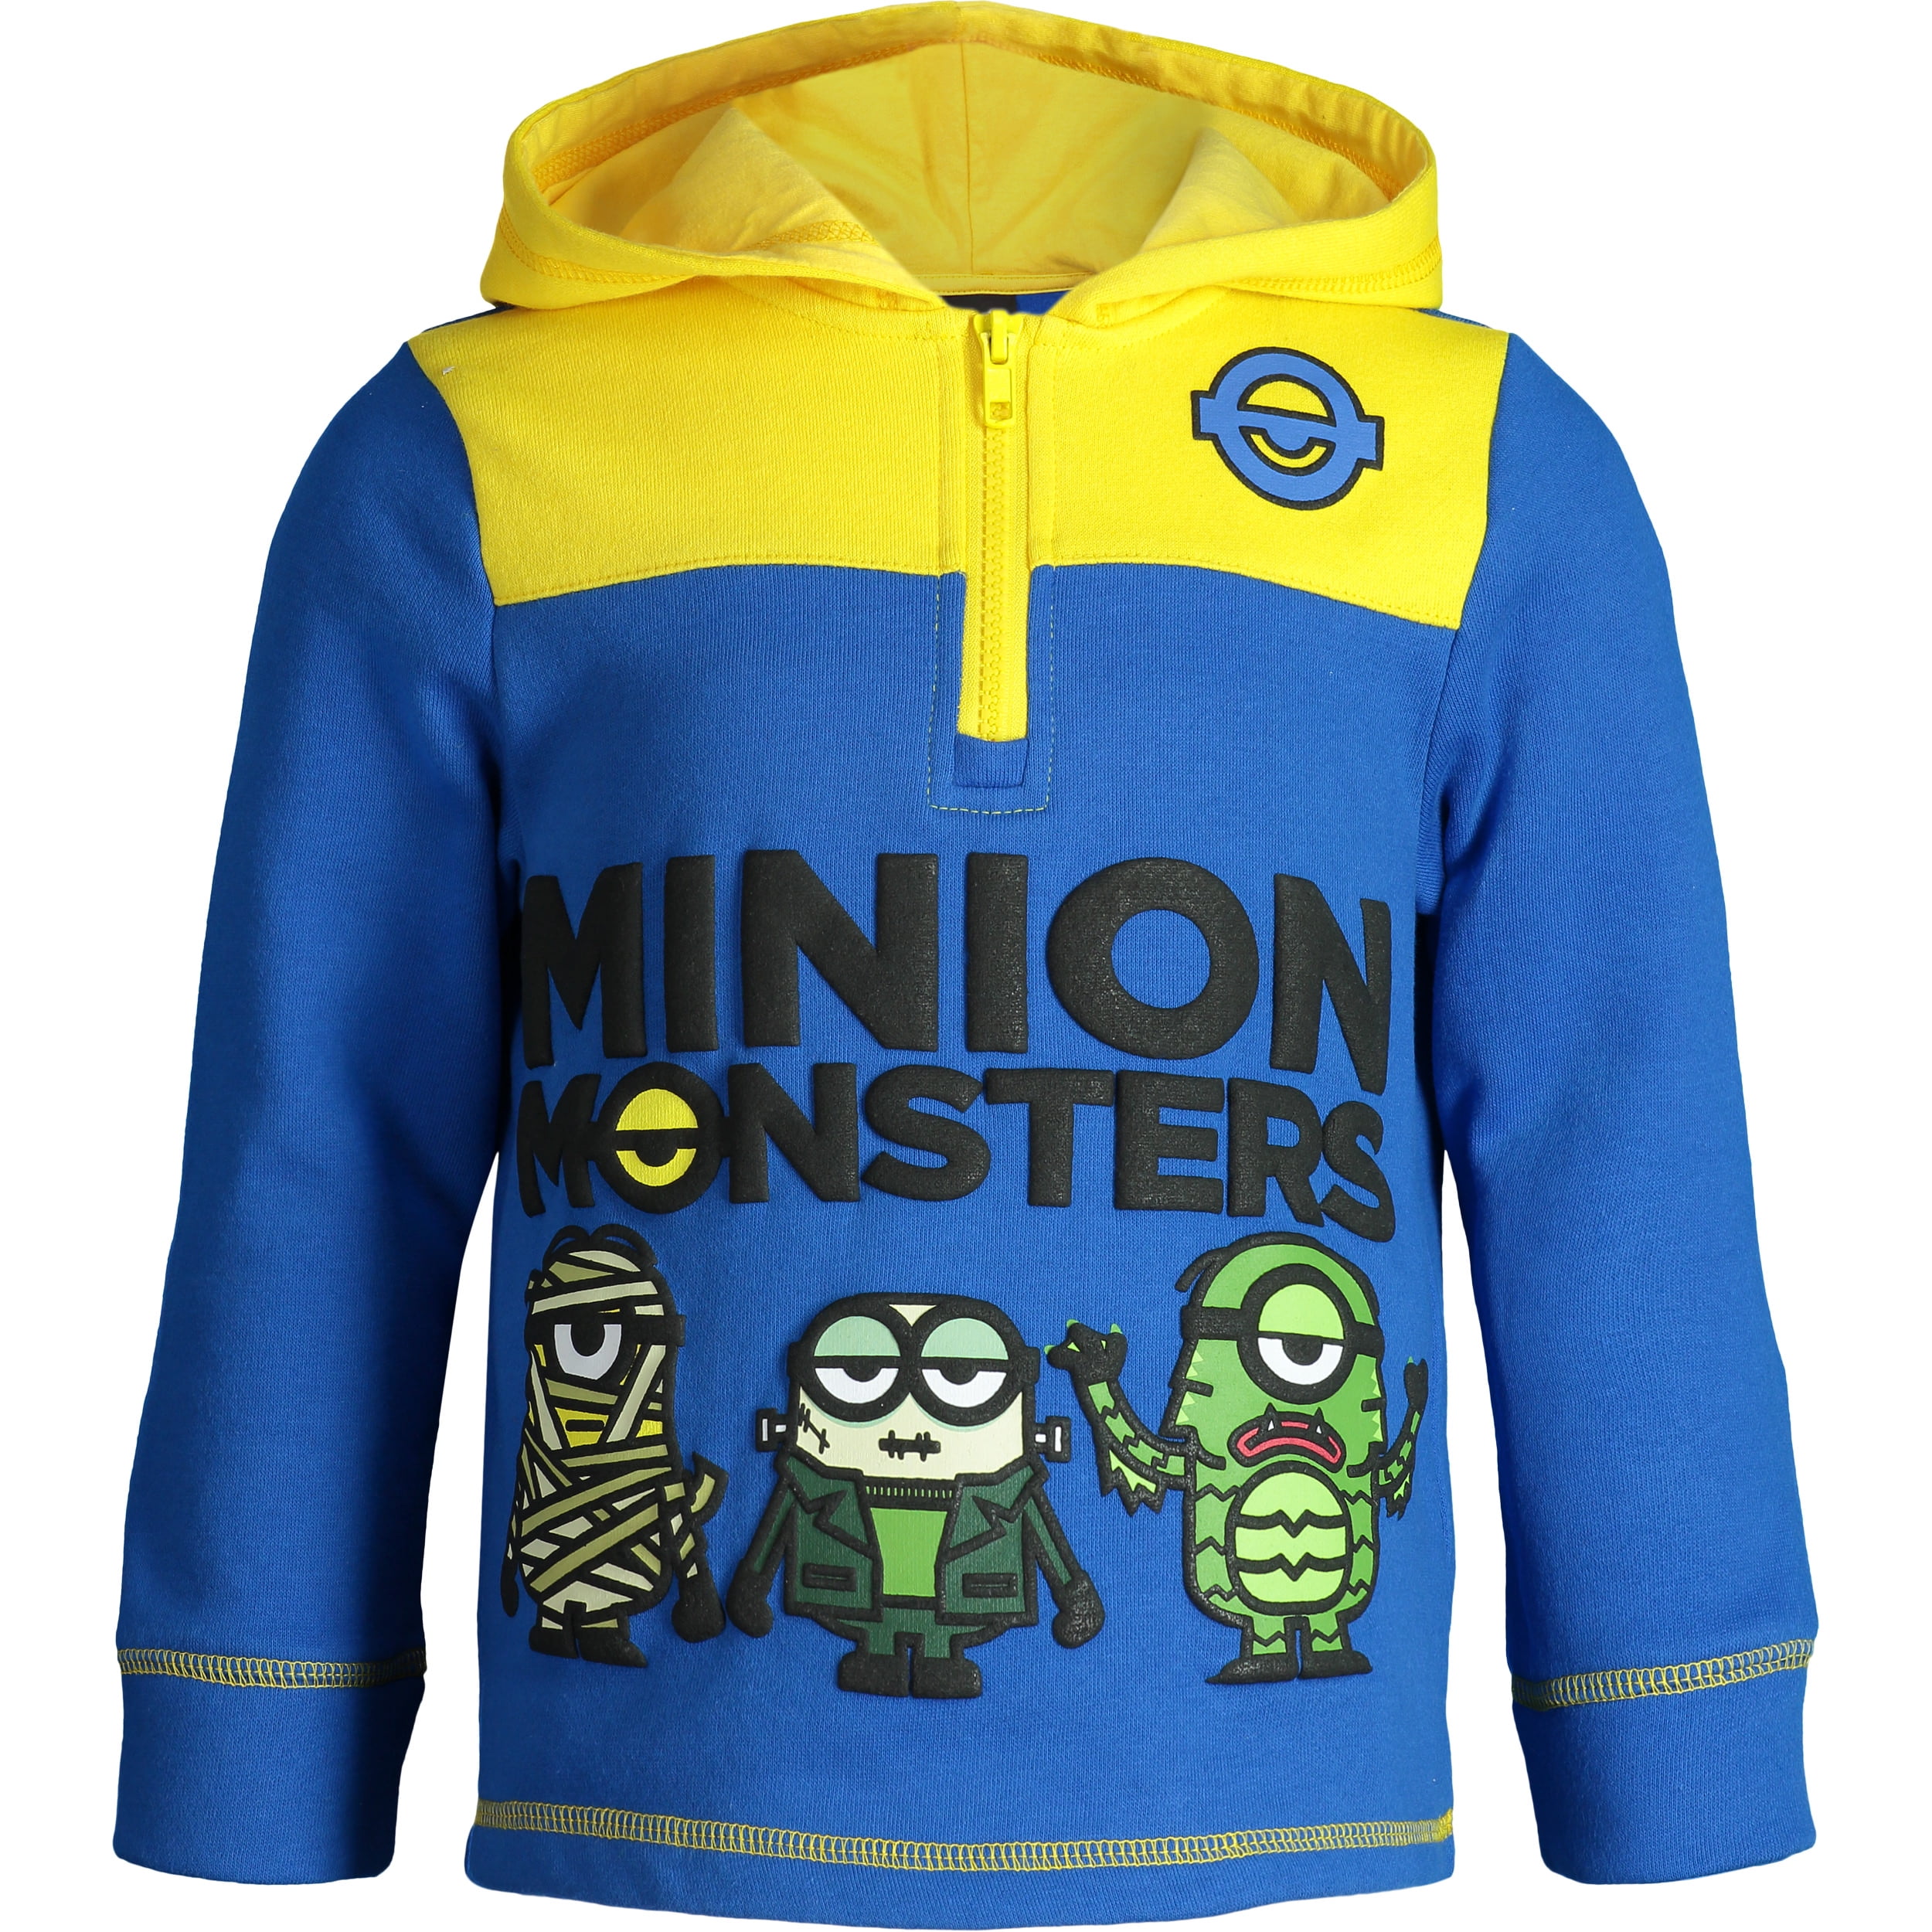 DESPICABLE ME MINIONS Zipped Hooded Fleece Jumper Jacket Age 3,4,5,6,7,8 Years 